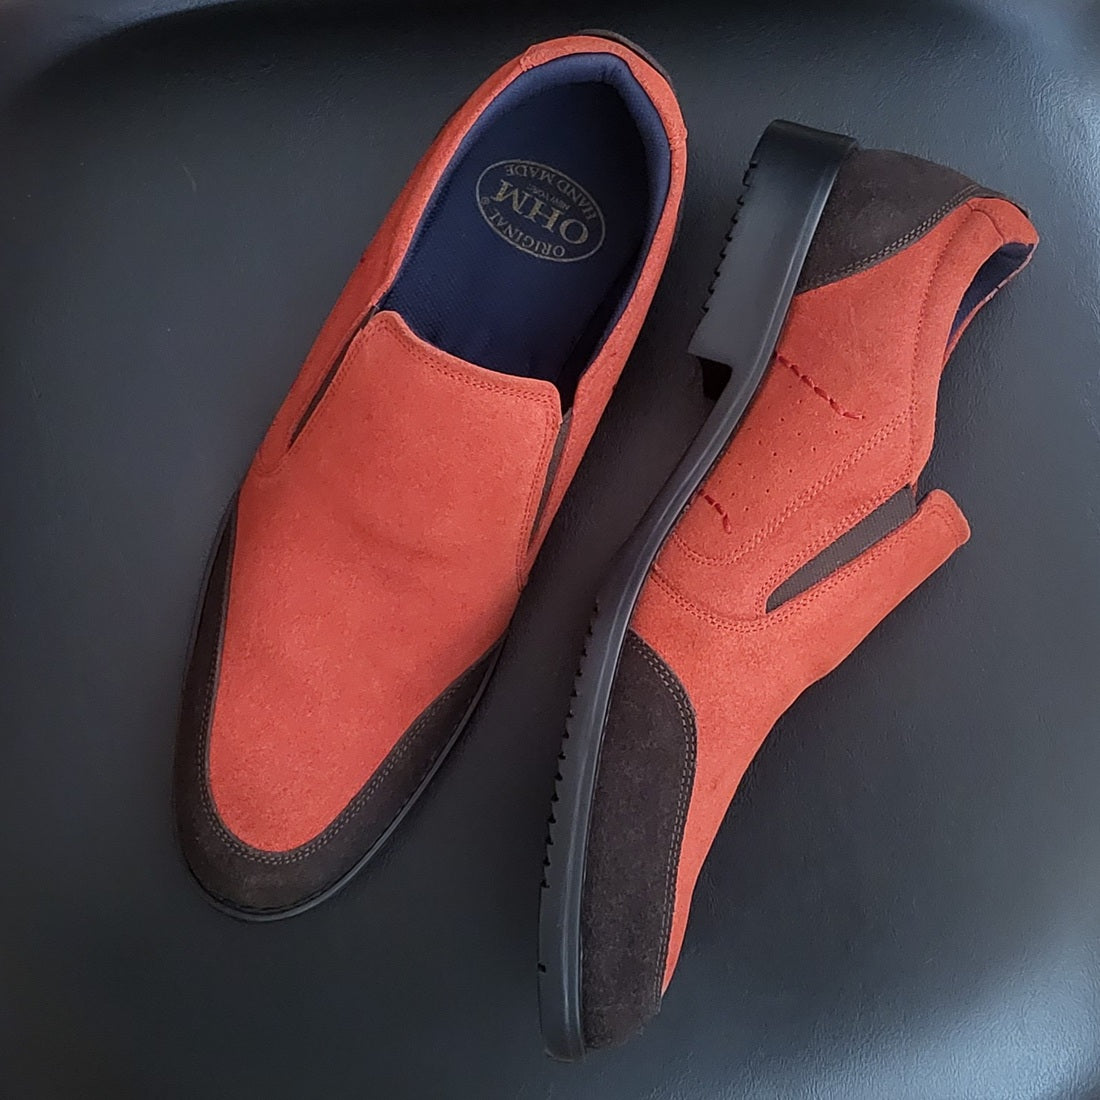 OHM New York Vamp Stitched Leather Slip-on Shoes